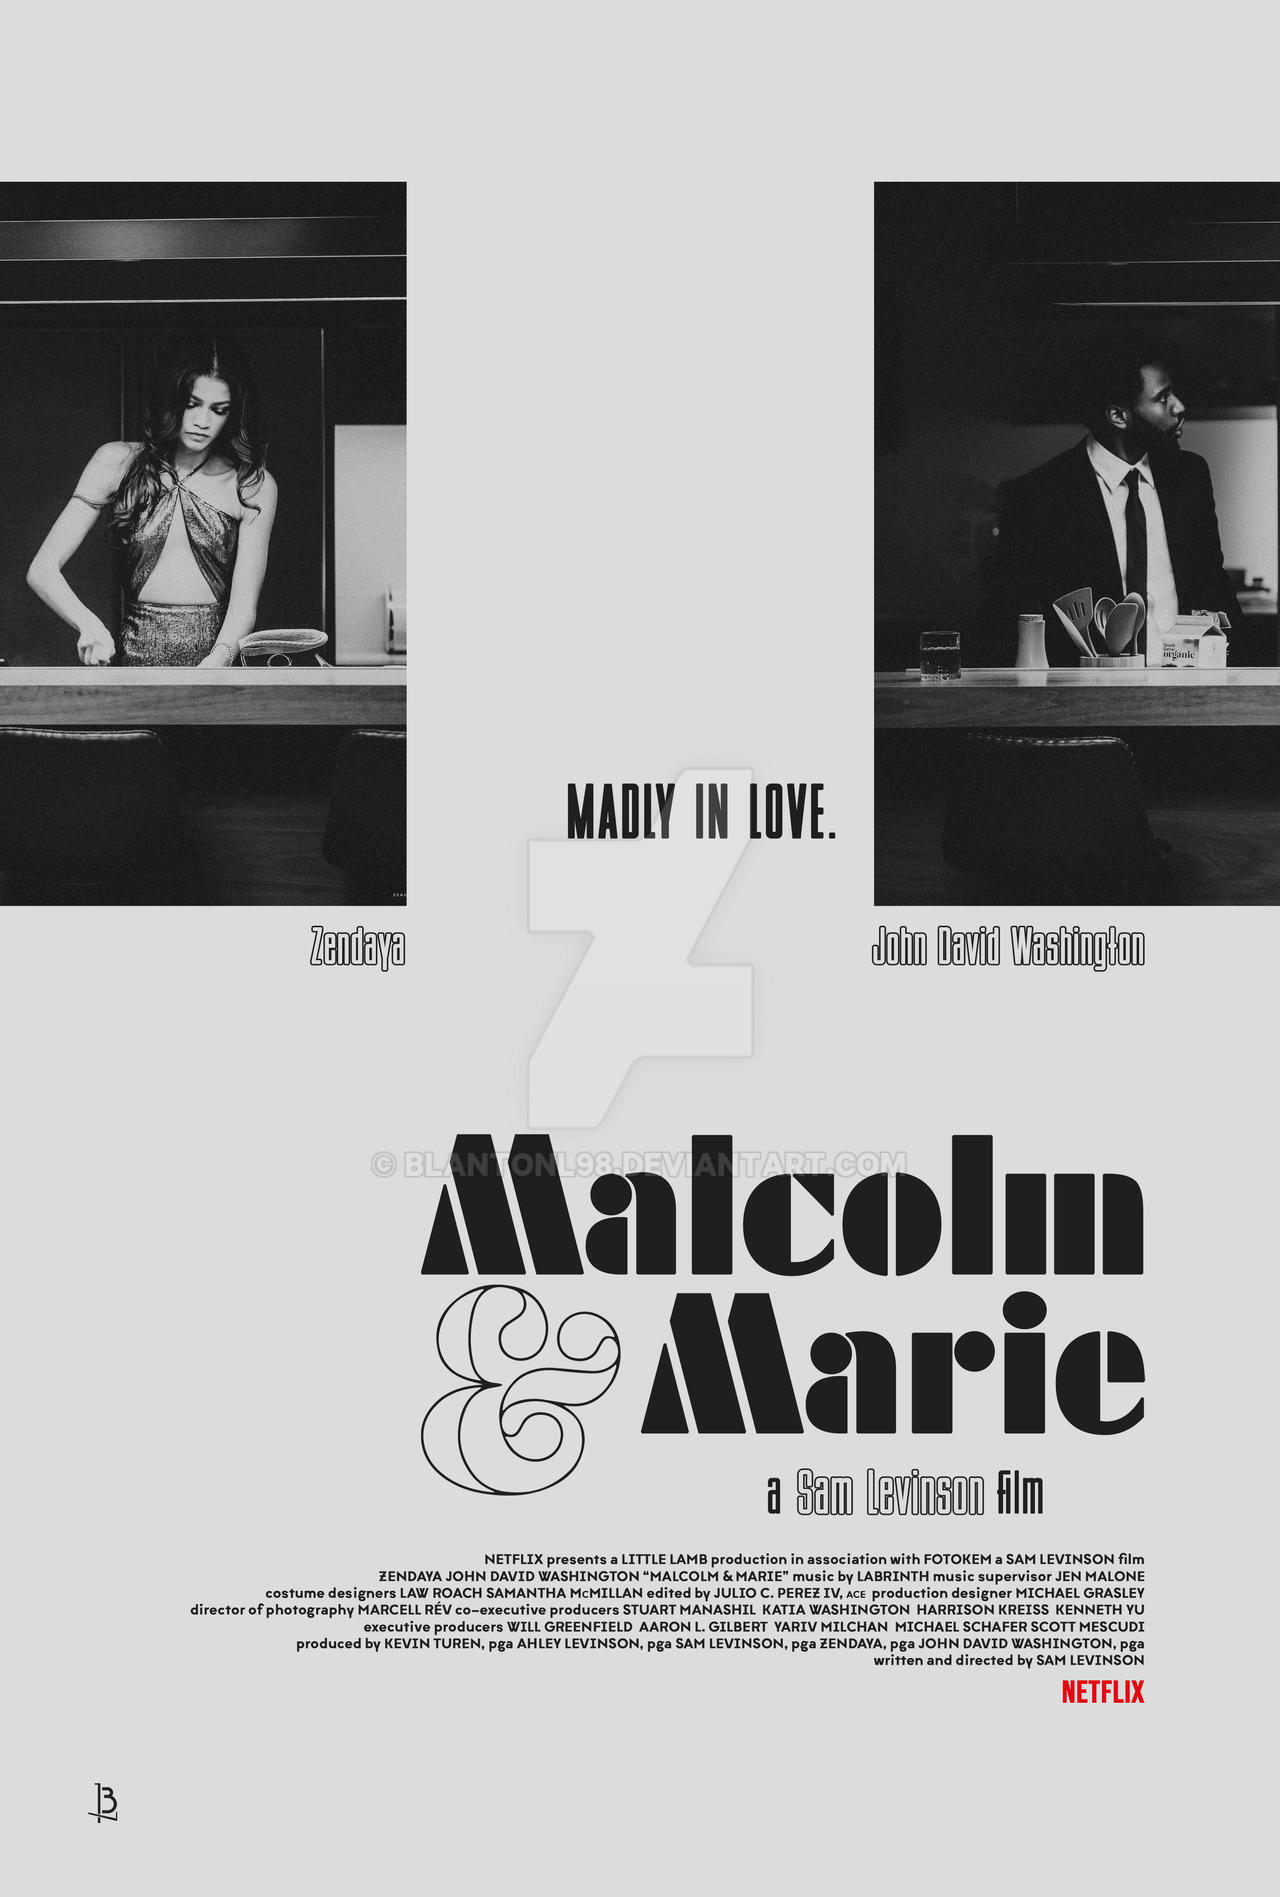 Malcolm &Amp; Marie Poster Wallpapers